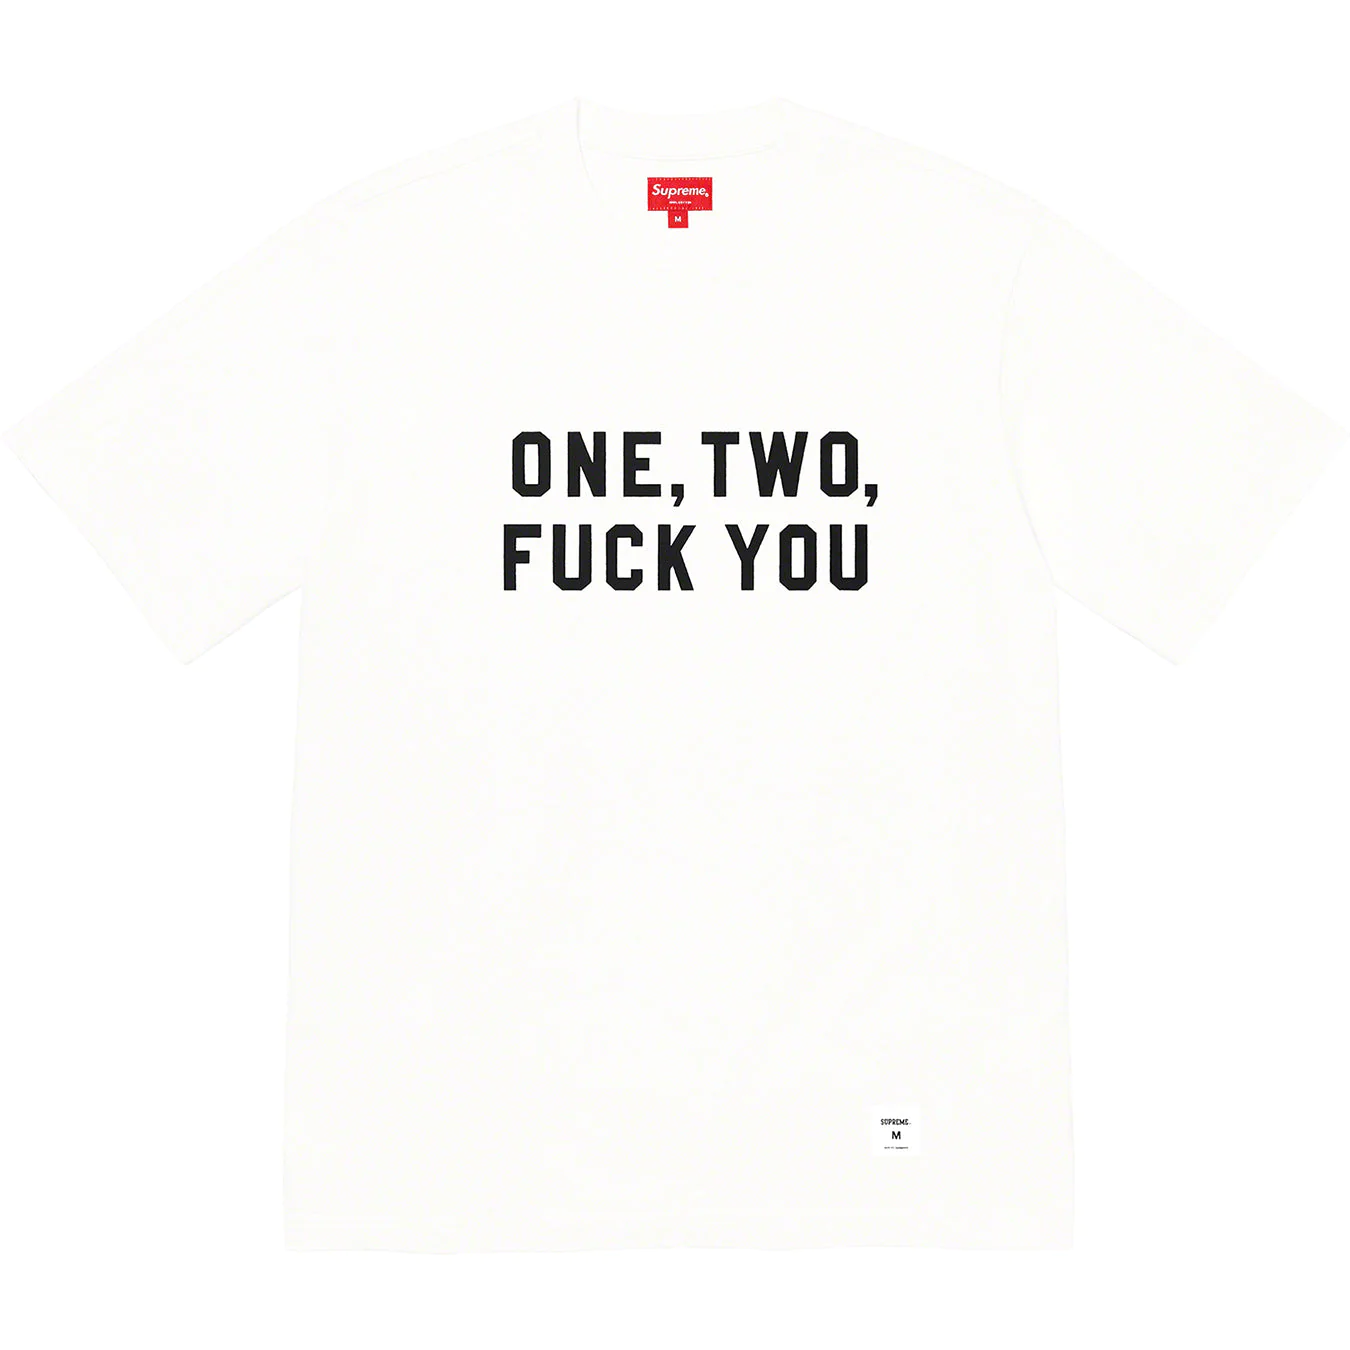 Supreme One Two Fuck You S/S Top